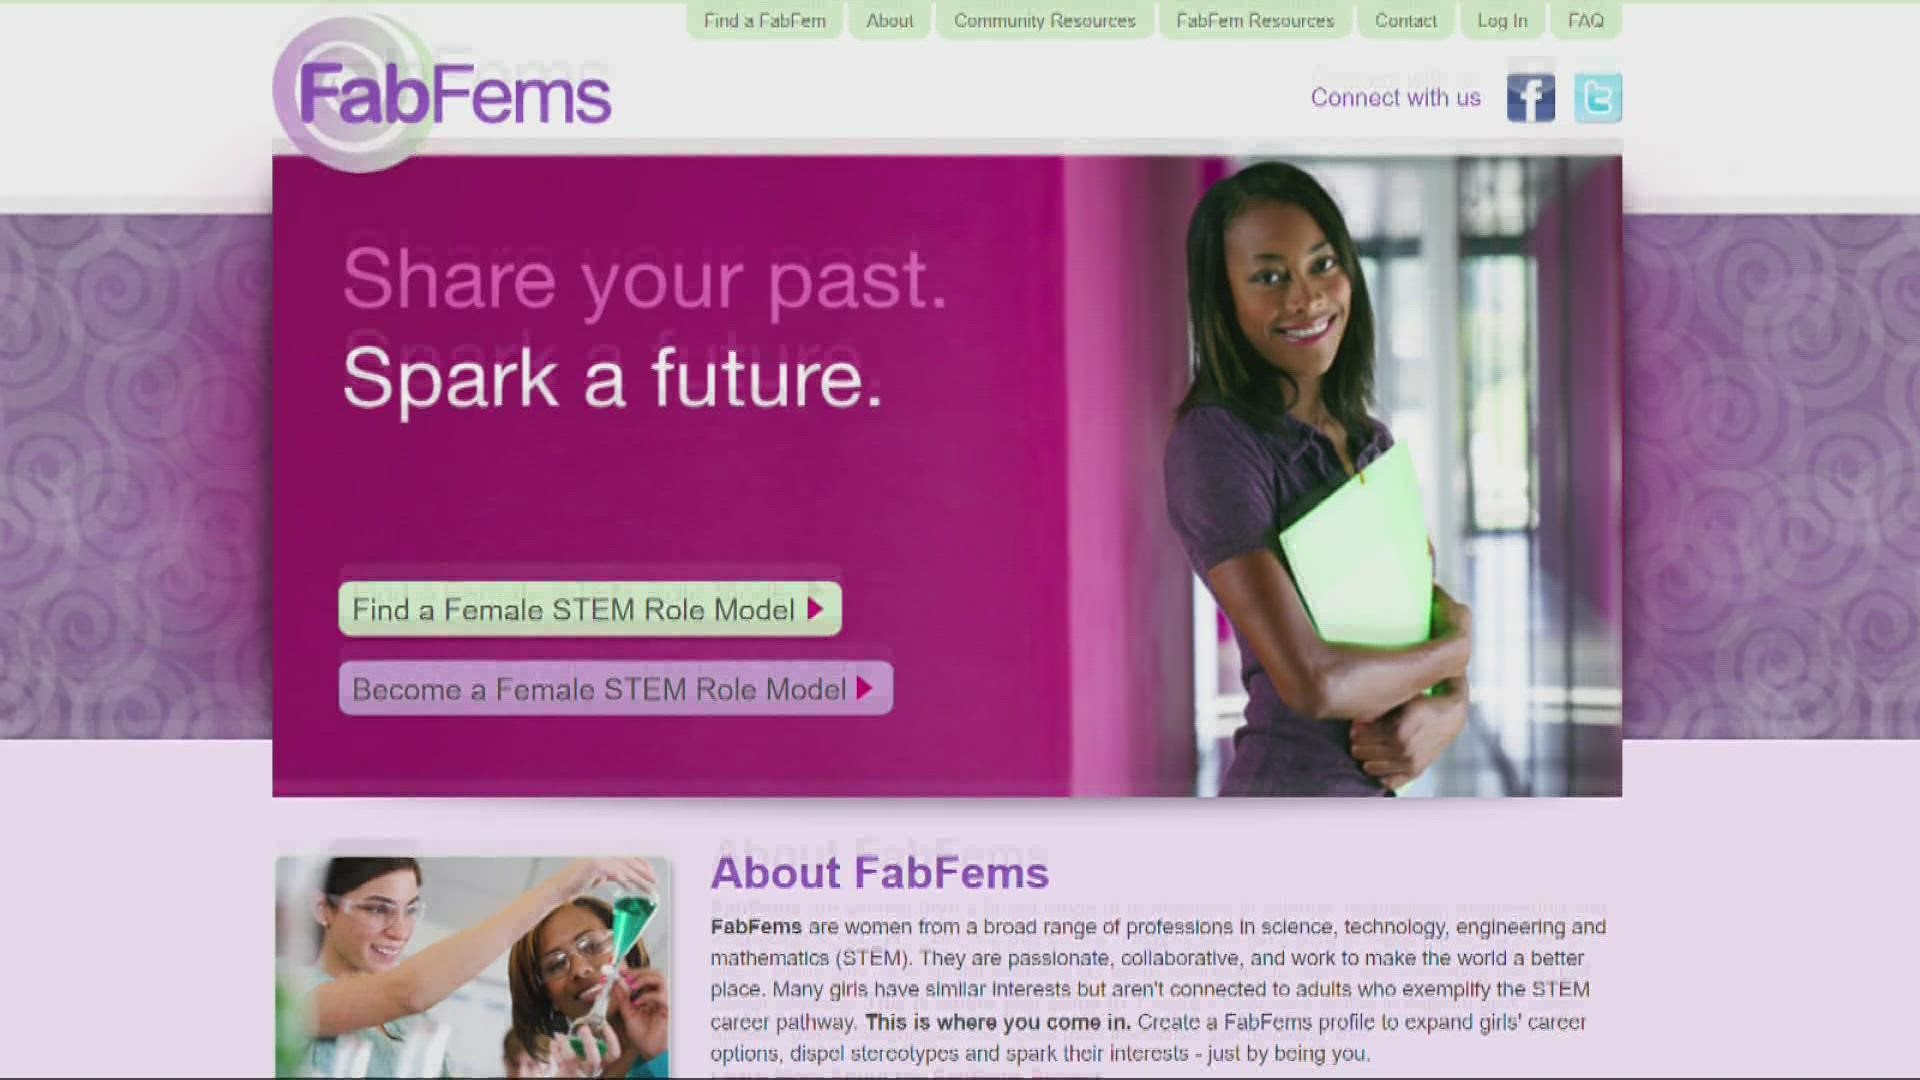 'FabFems' is an online international directory of women who work in science, technology, engineering, and mathematics professions.